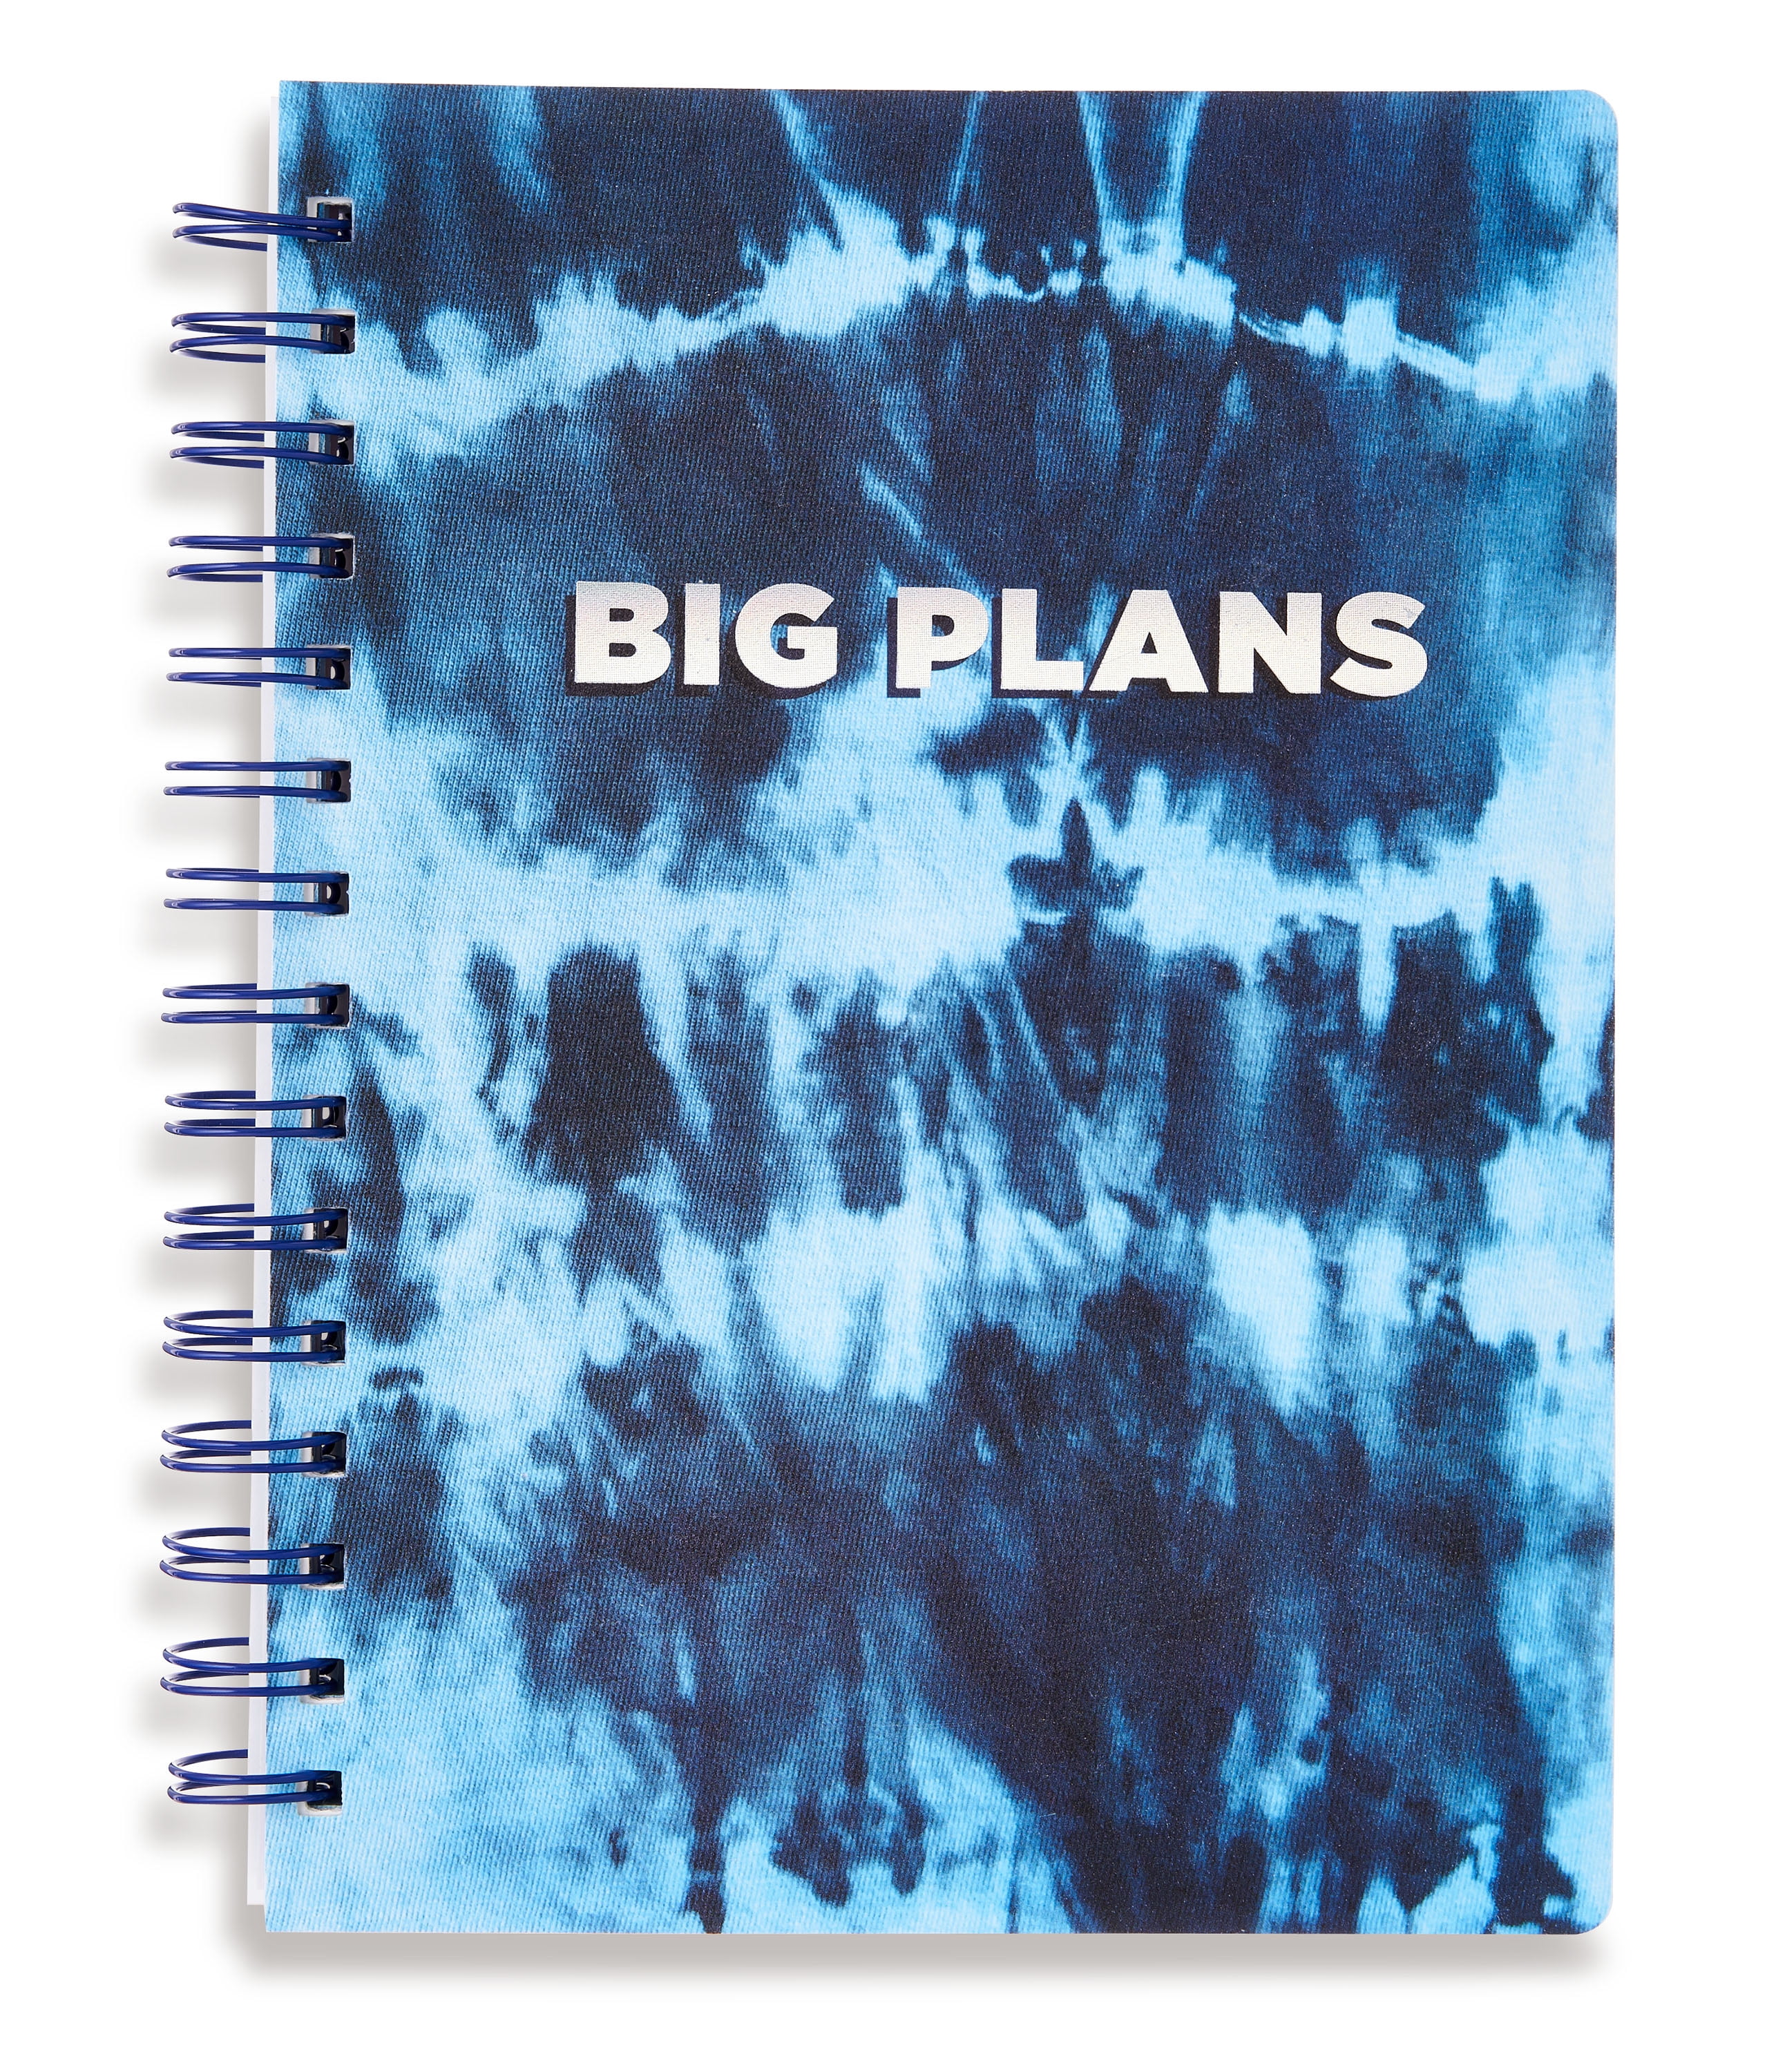 Planner Pens – Planned and Proper